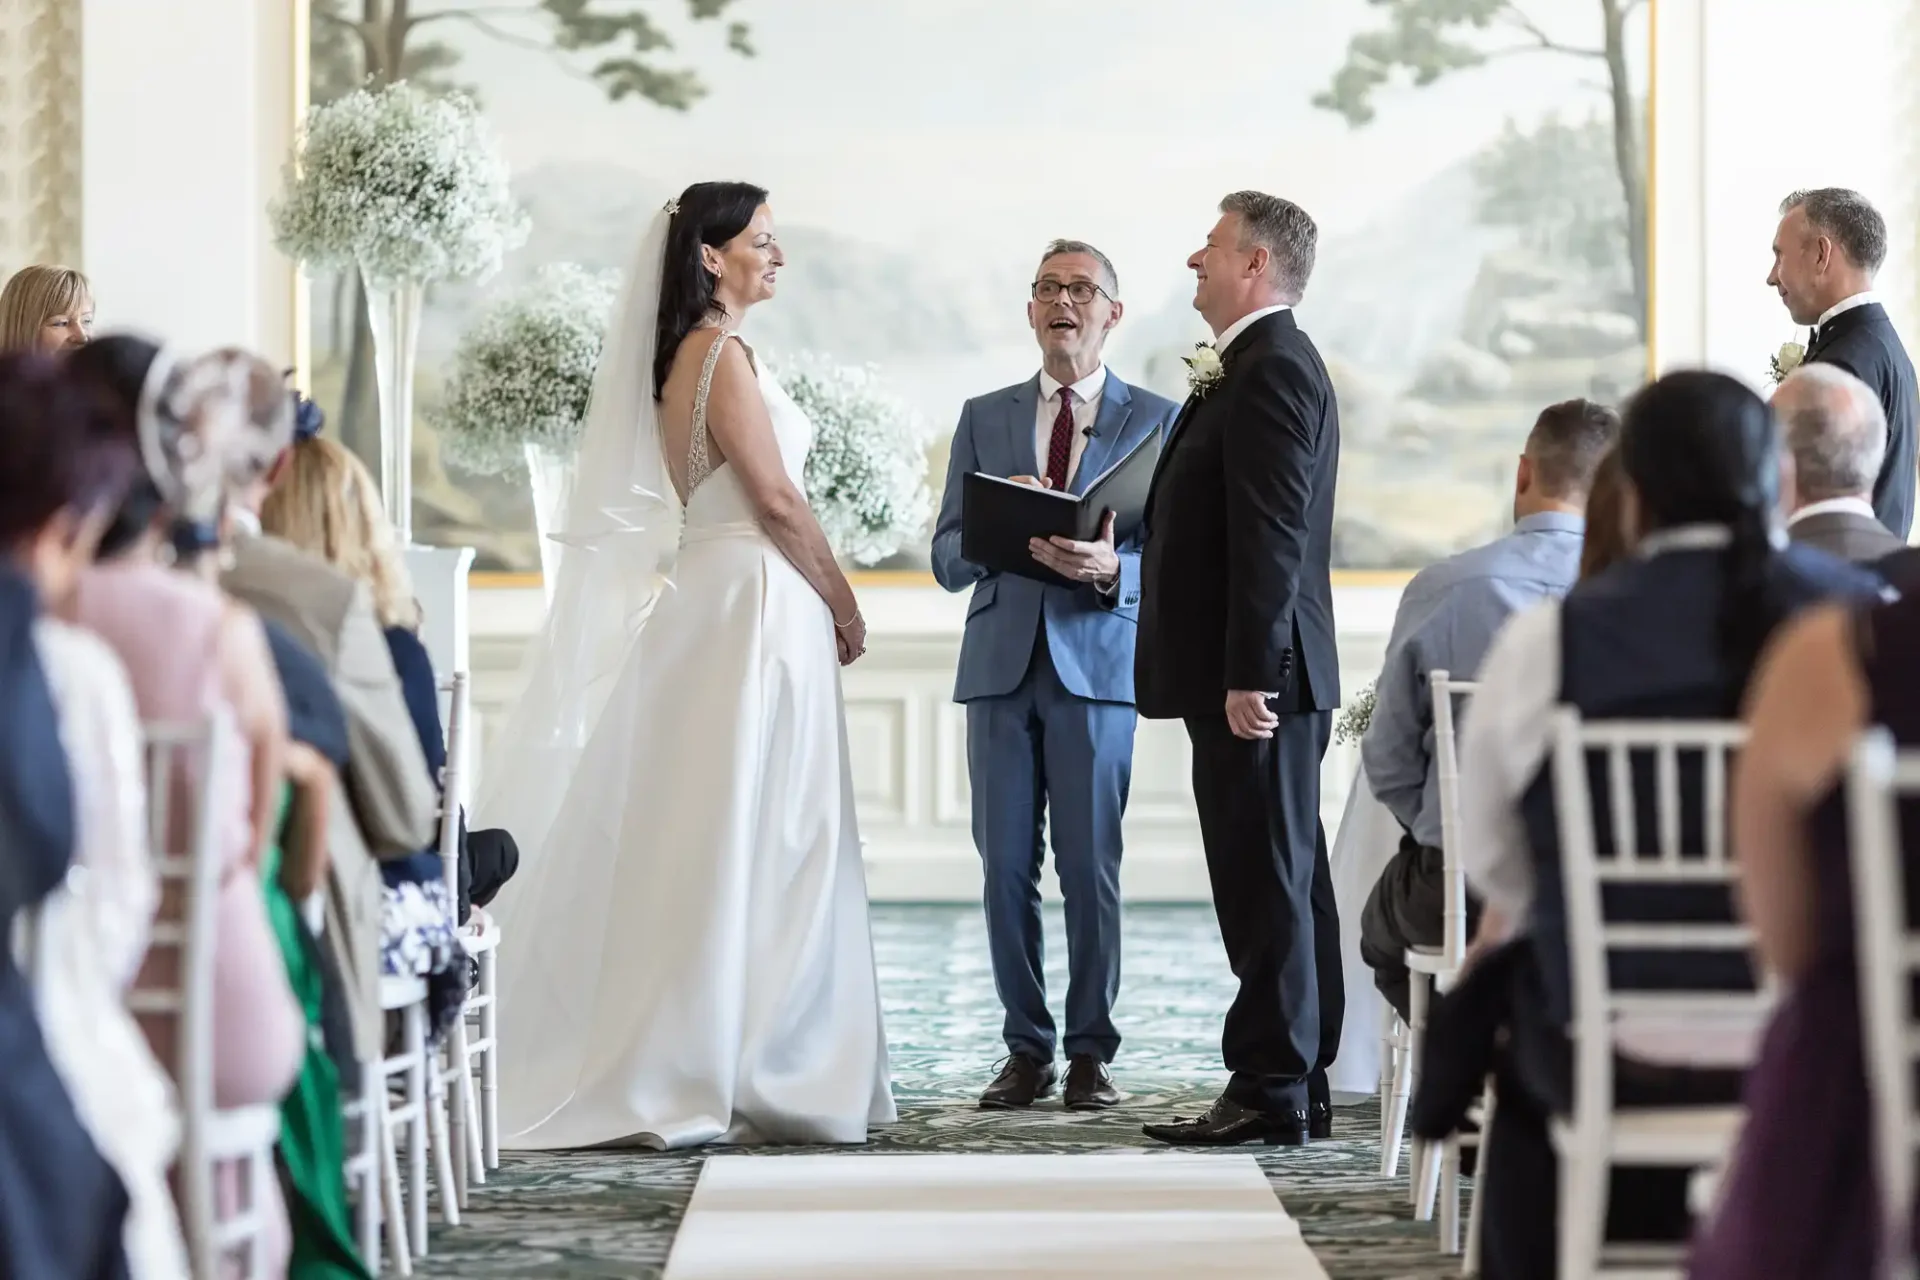 A bride and groom exchanging vows at a wedding ceremony indoors, with an officiant and guests watching.